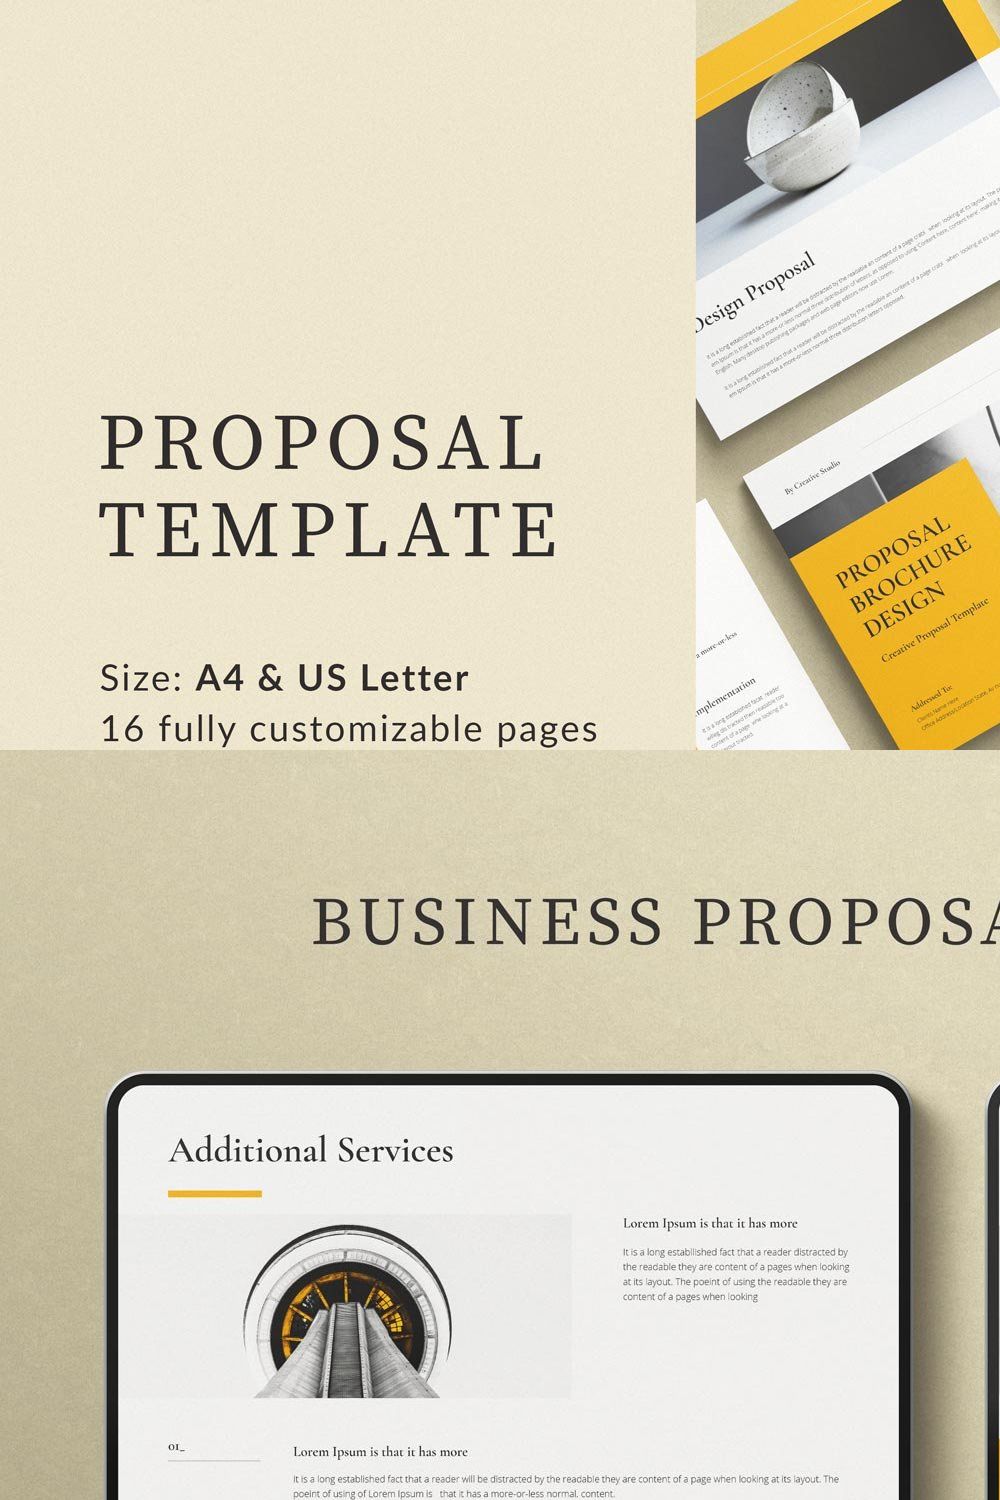 Proposal Brochure Template pinterest preview image.